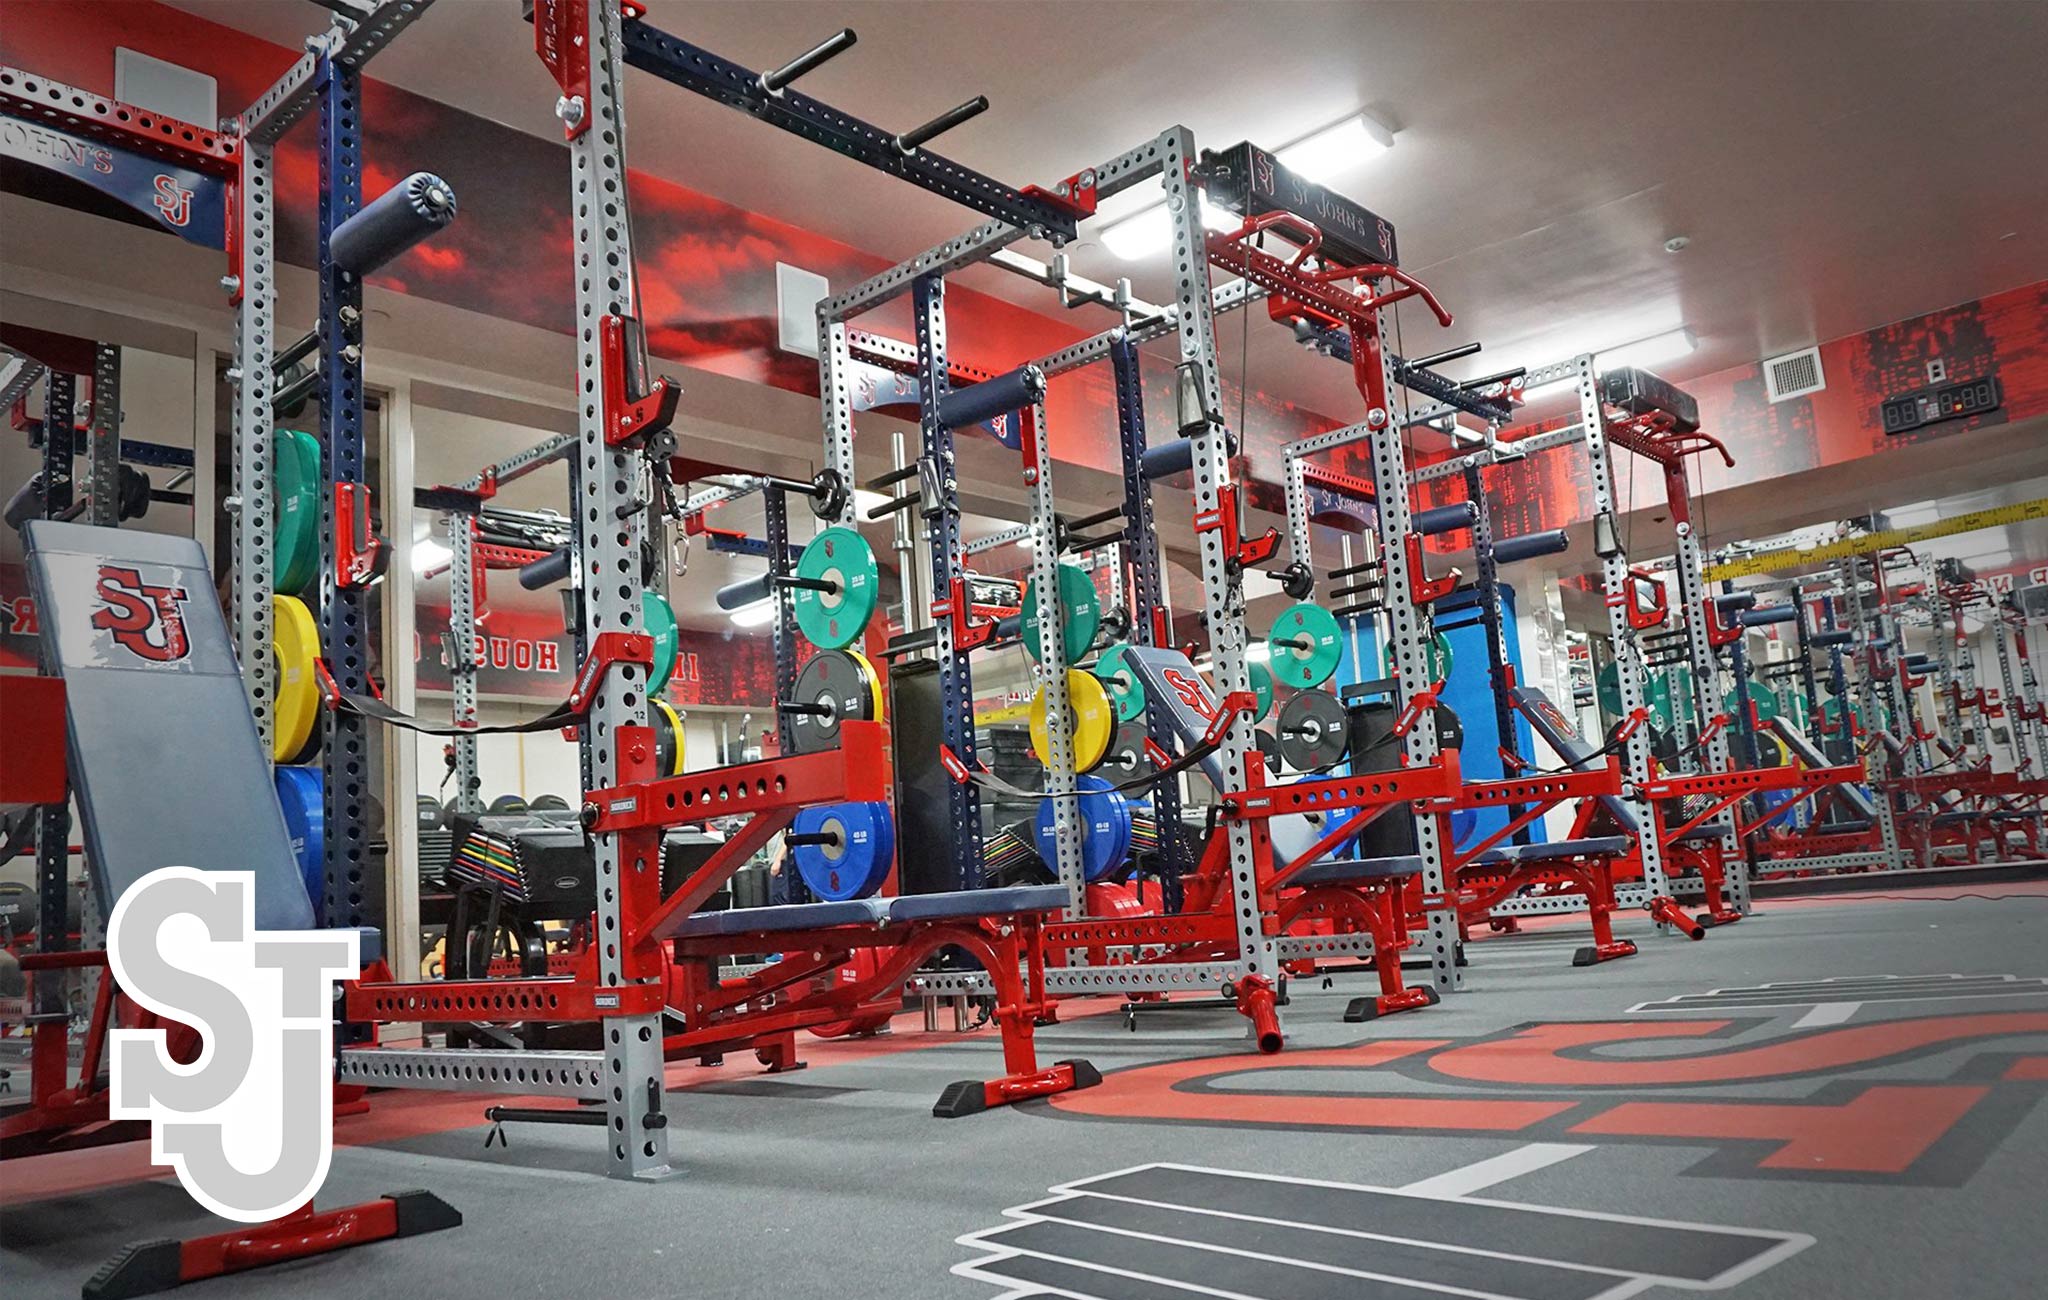 St Johns University Sorinex strength and conditioning facility